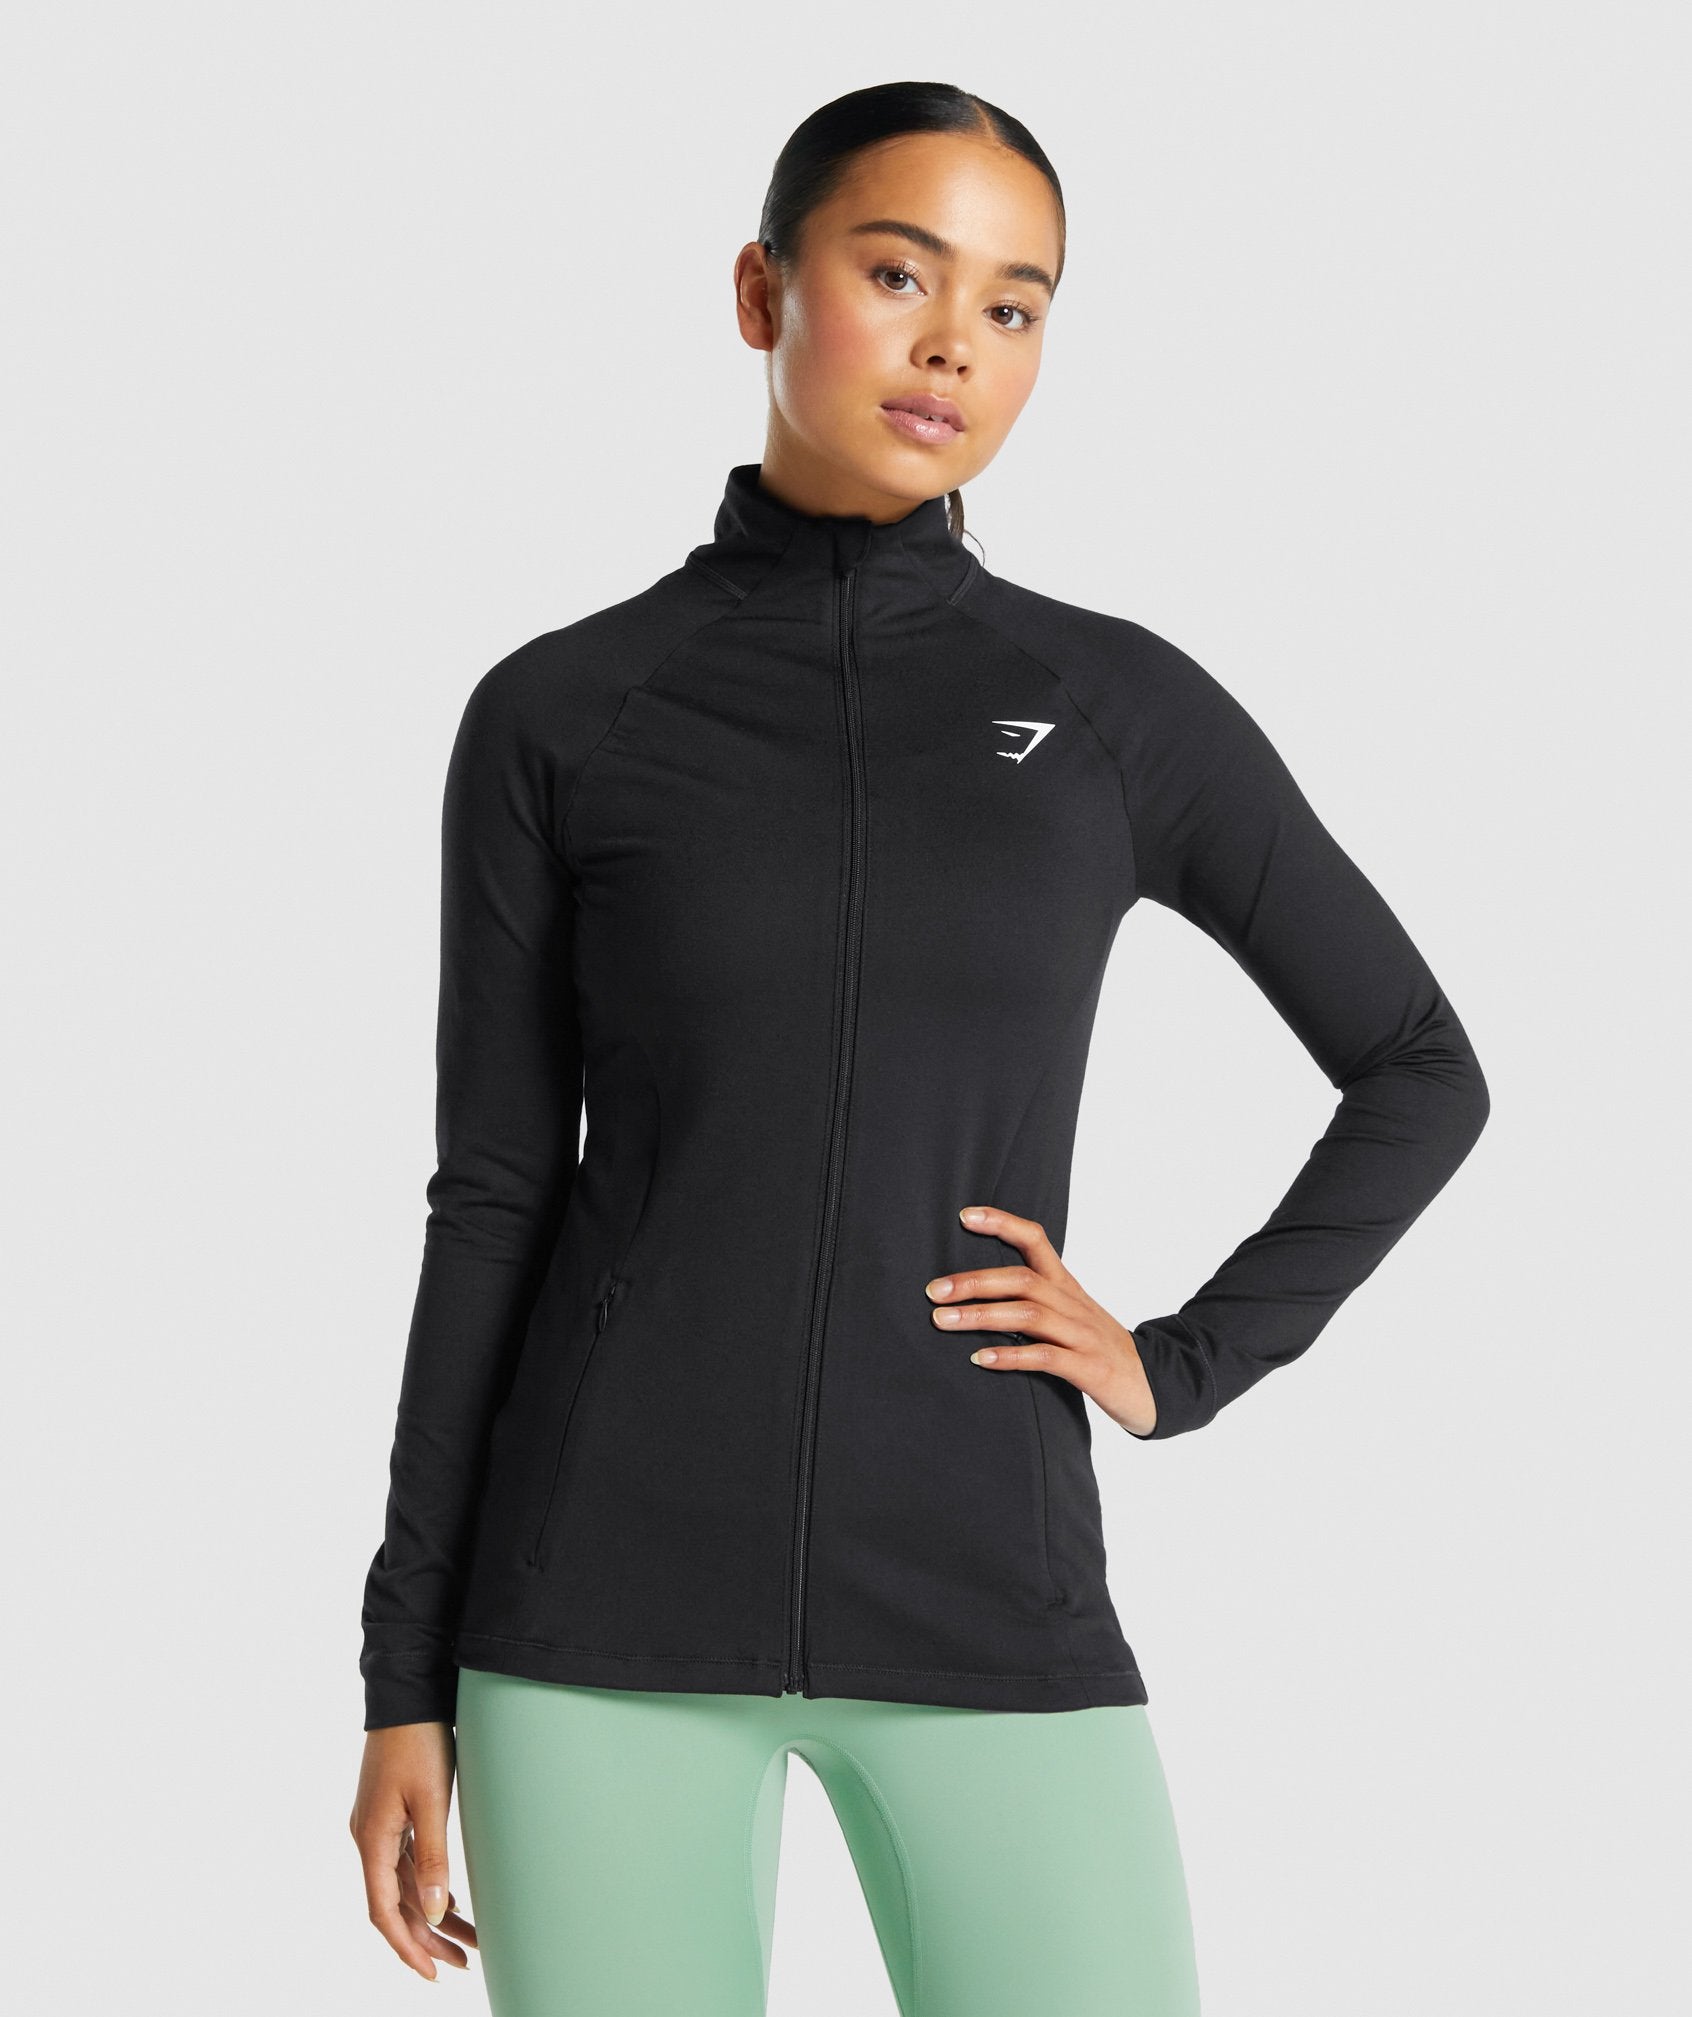 GYMSHARK - NEW Women's Black Training Zip Up Top - Size Small :  r/gym_apparel_for_women